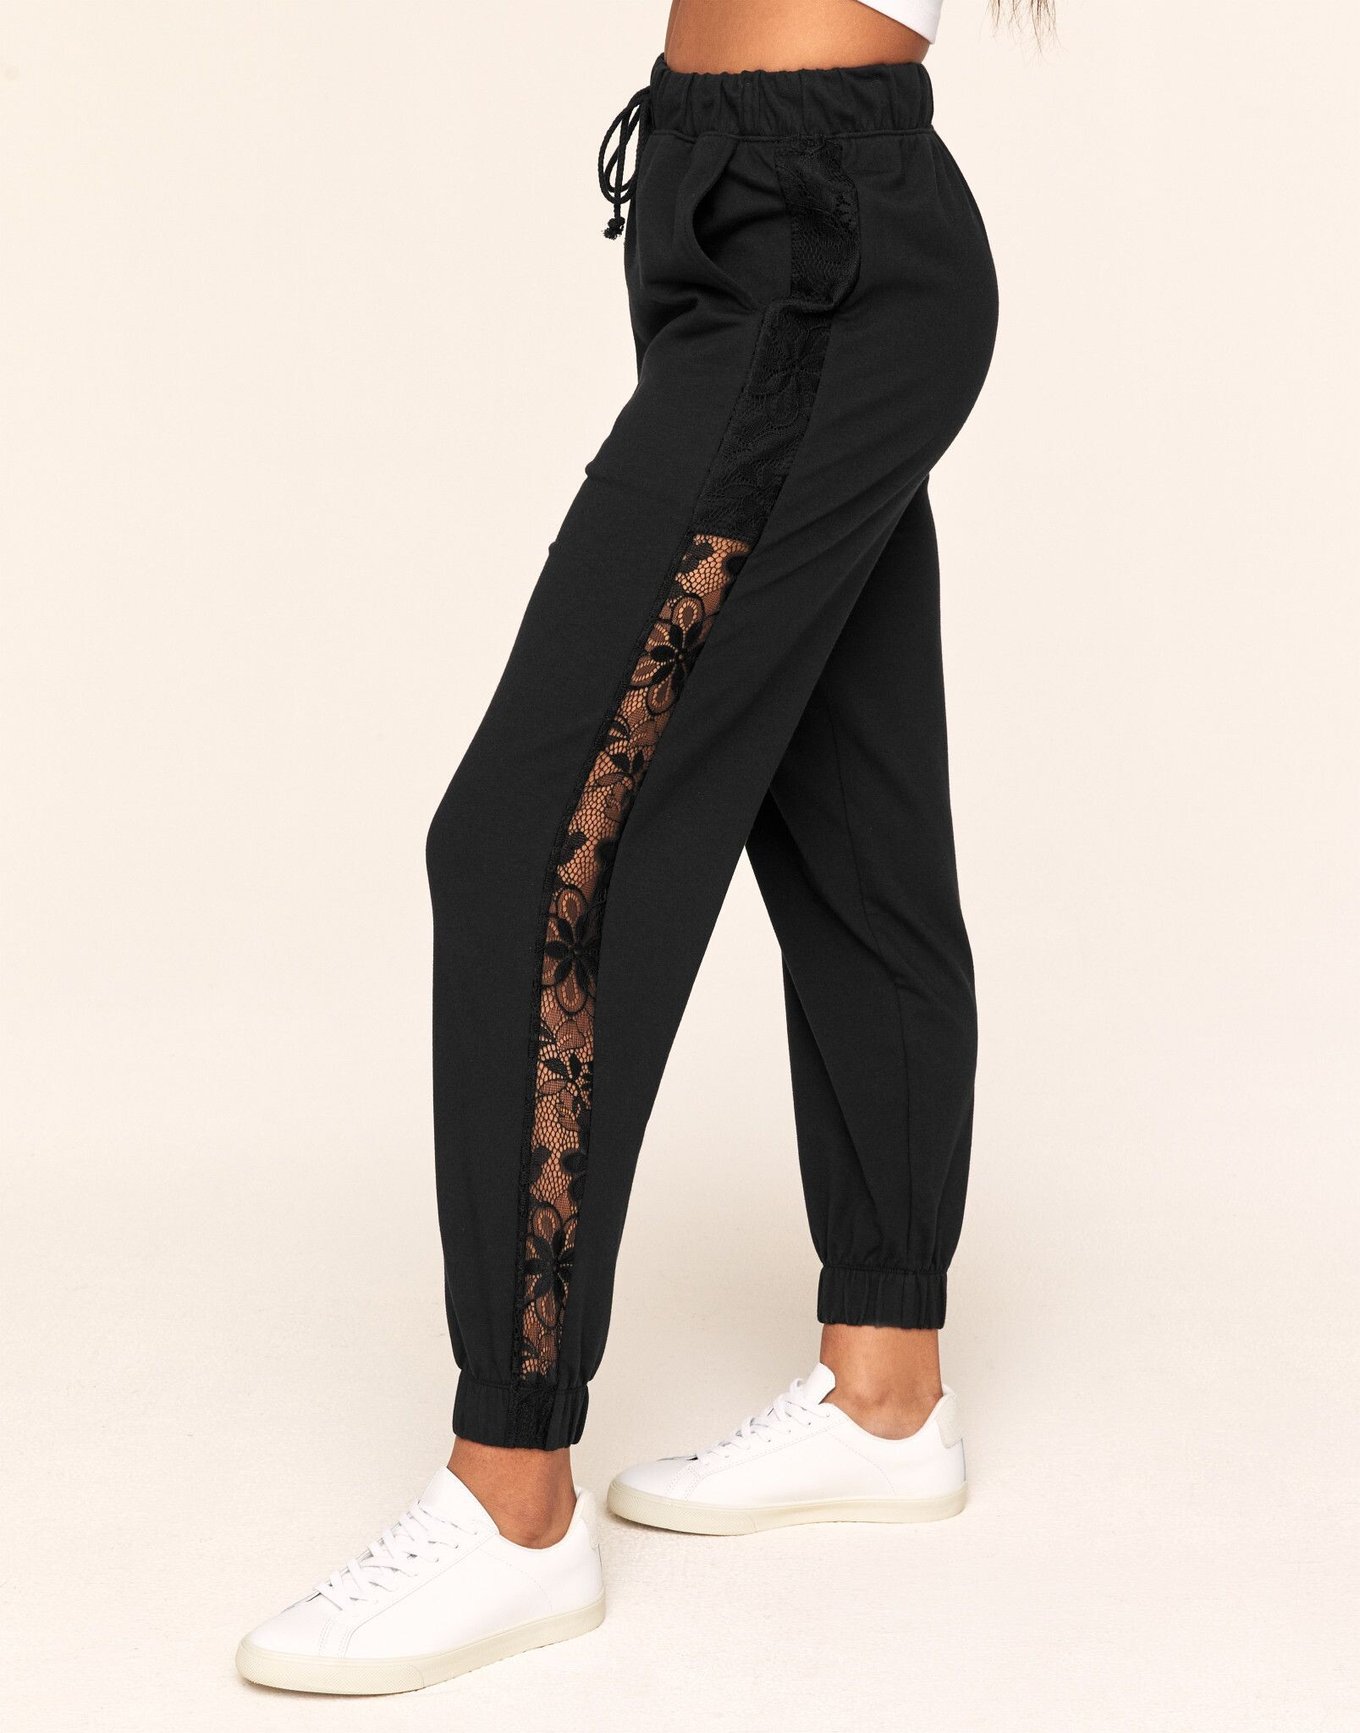 Just Yesterday - Super Soft Joggers for Women